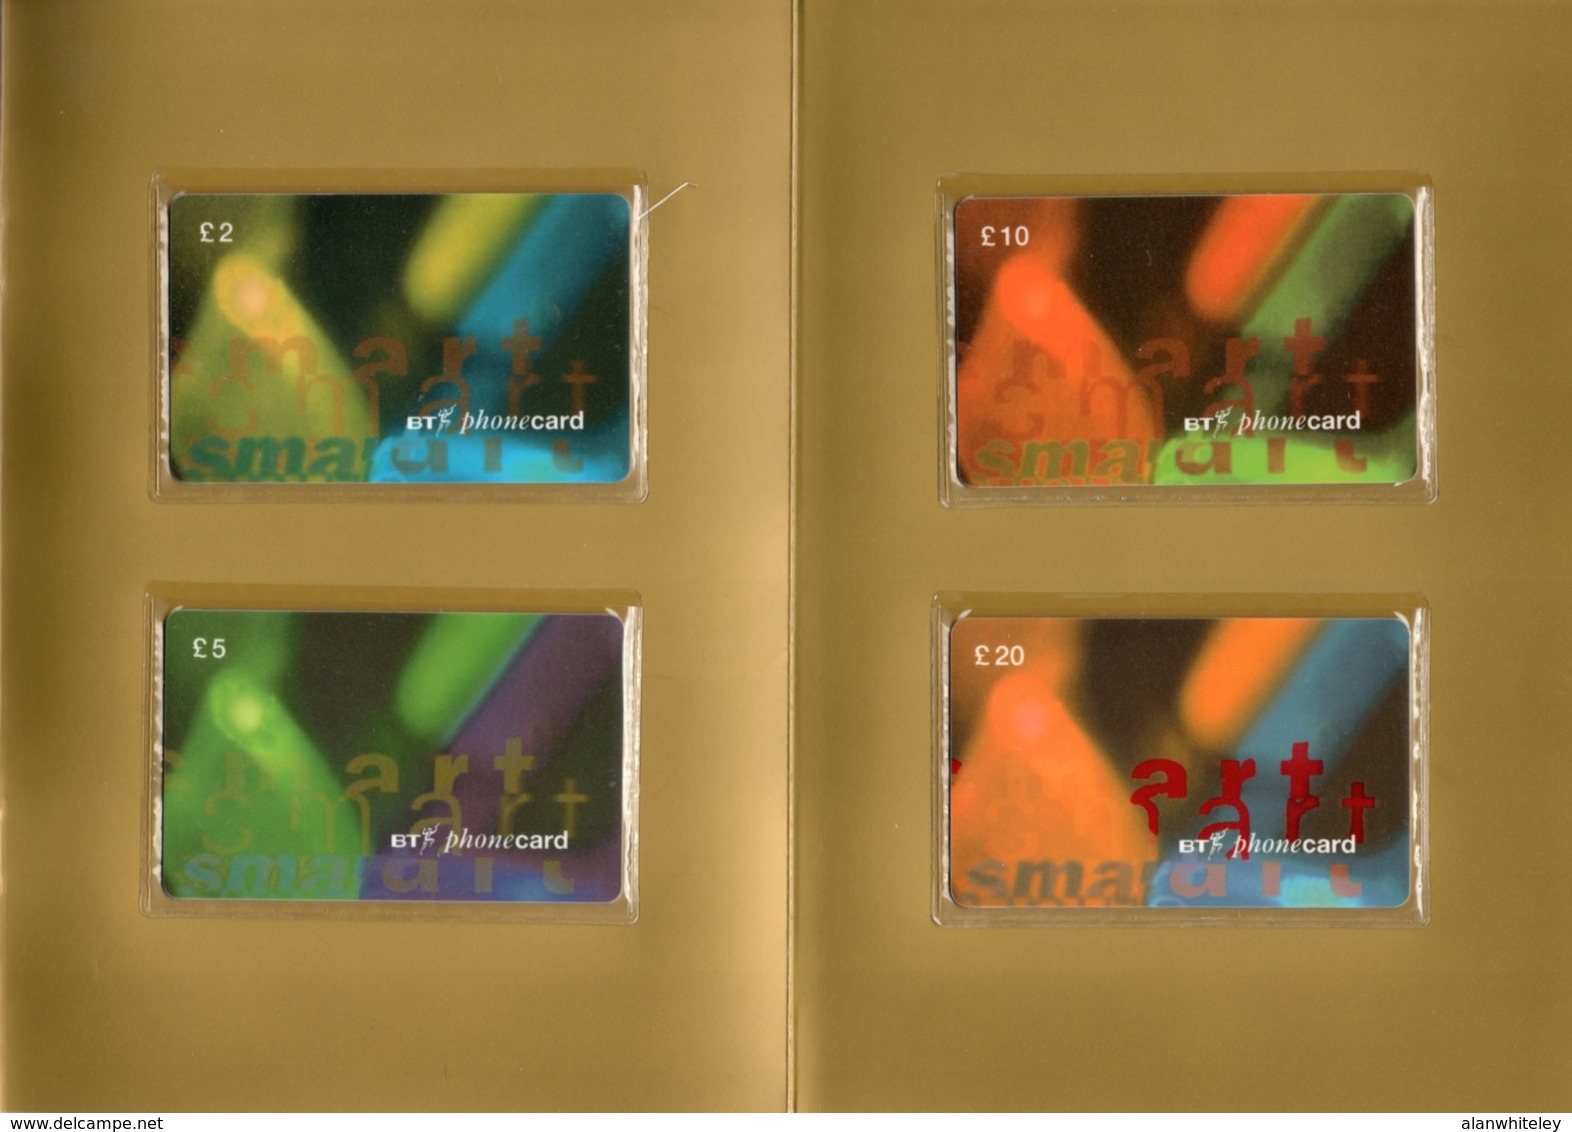 GREAT BRITAIN 1995 Smart Card Trial/Thank You: Presentation Pack Containing 4 Phonecards MINT/UNUSED - BT Test & Ensayos